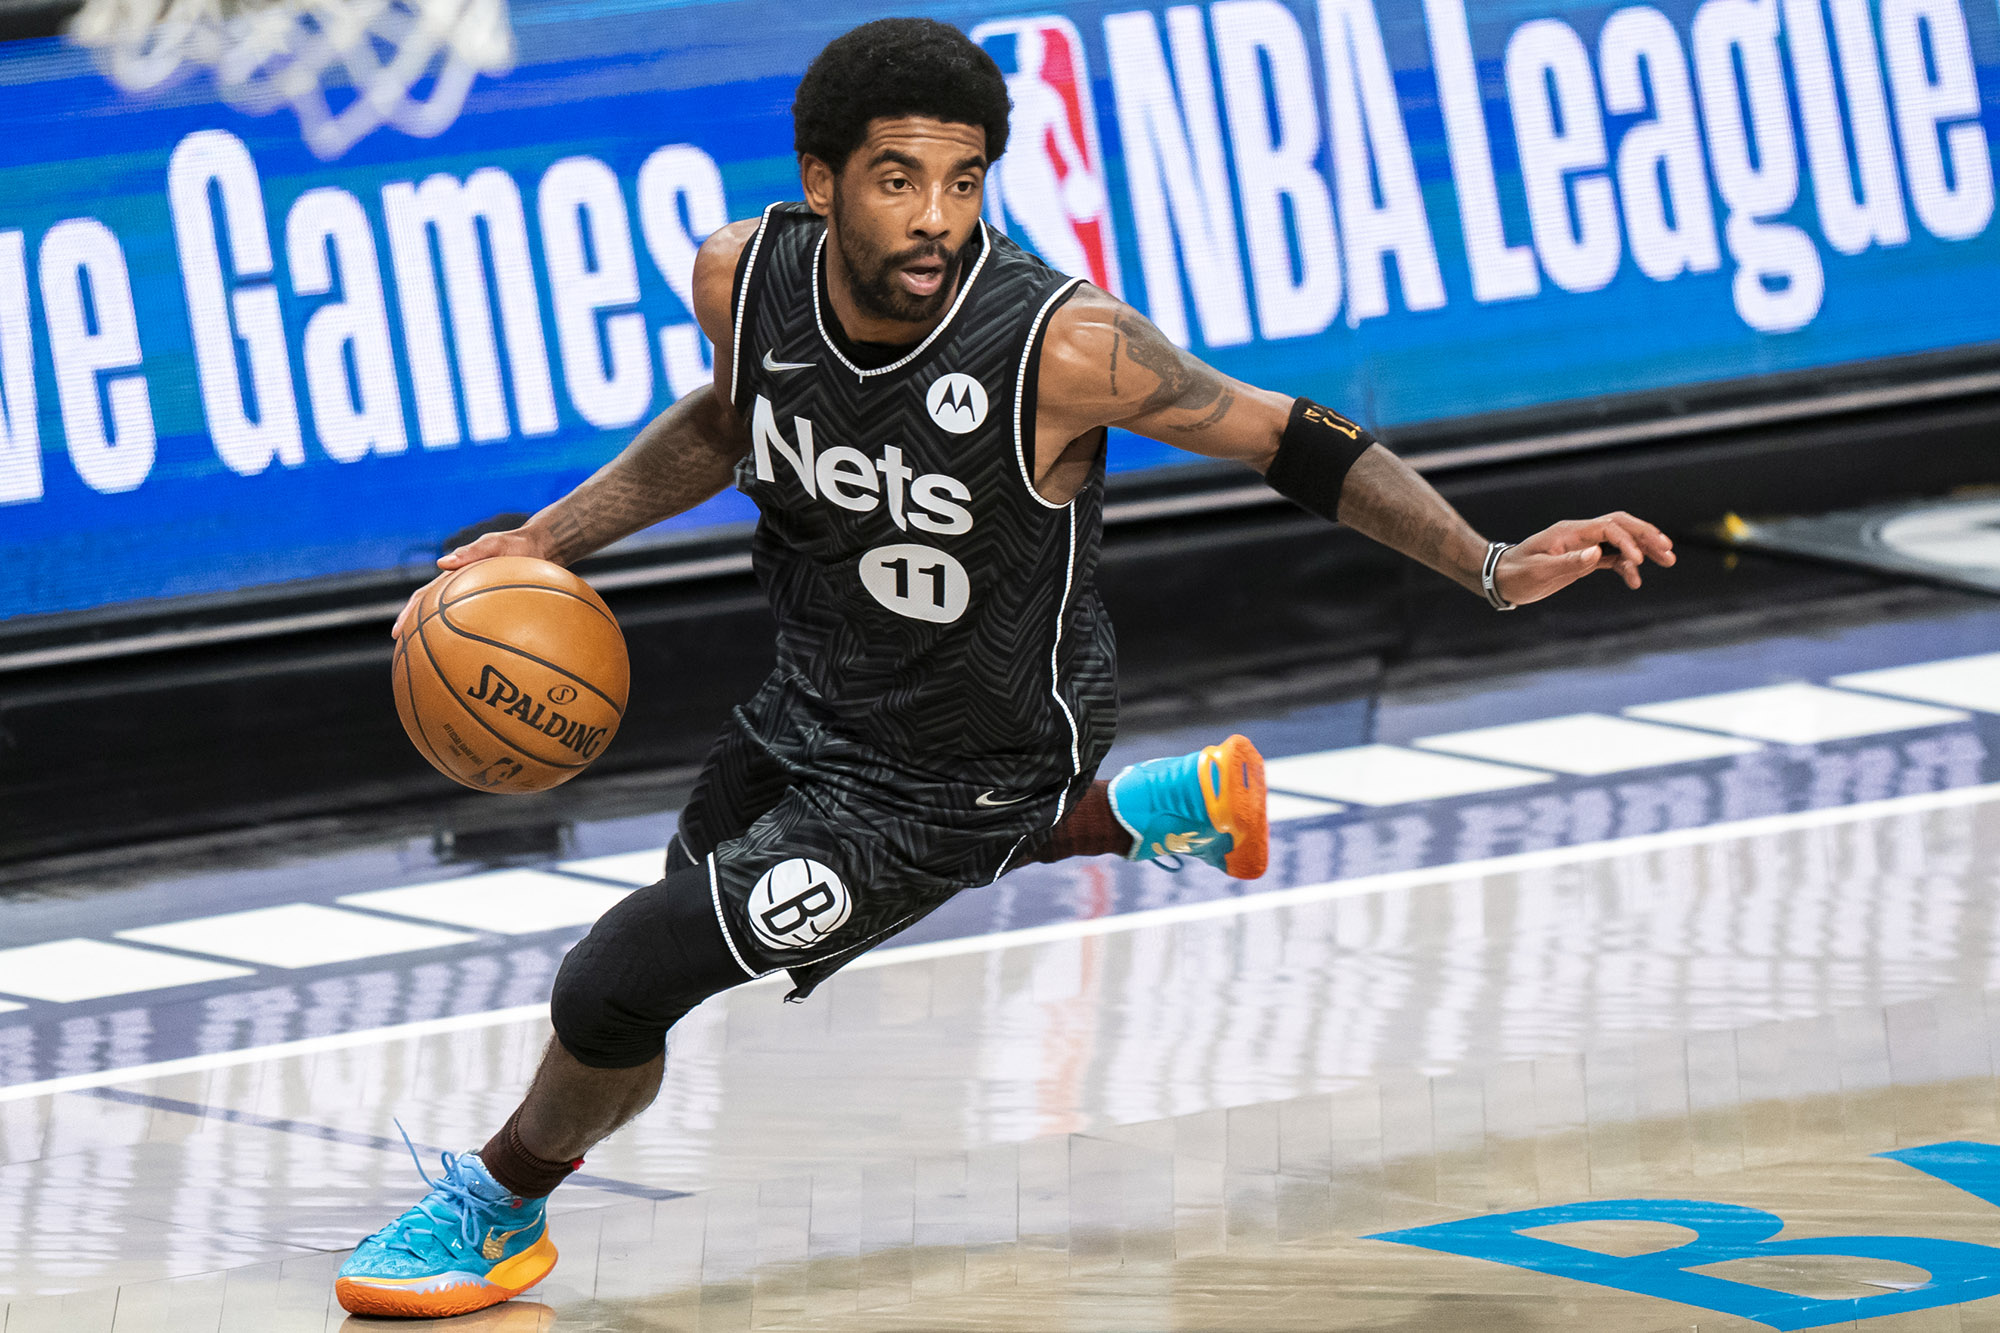 Brooklyn's Kyrie Irving dribbles the basketball during a Nets game.